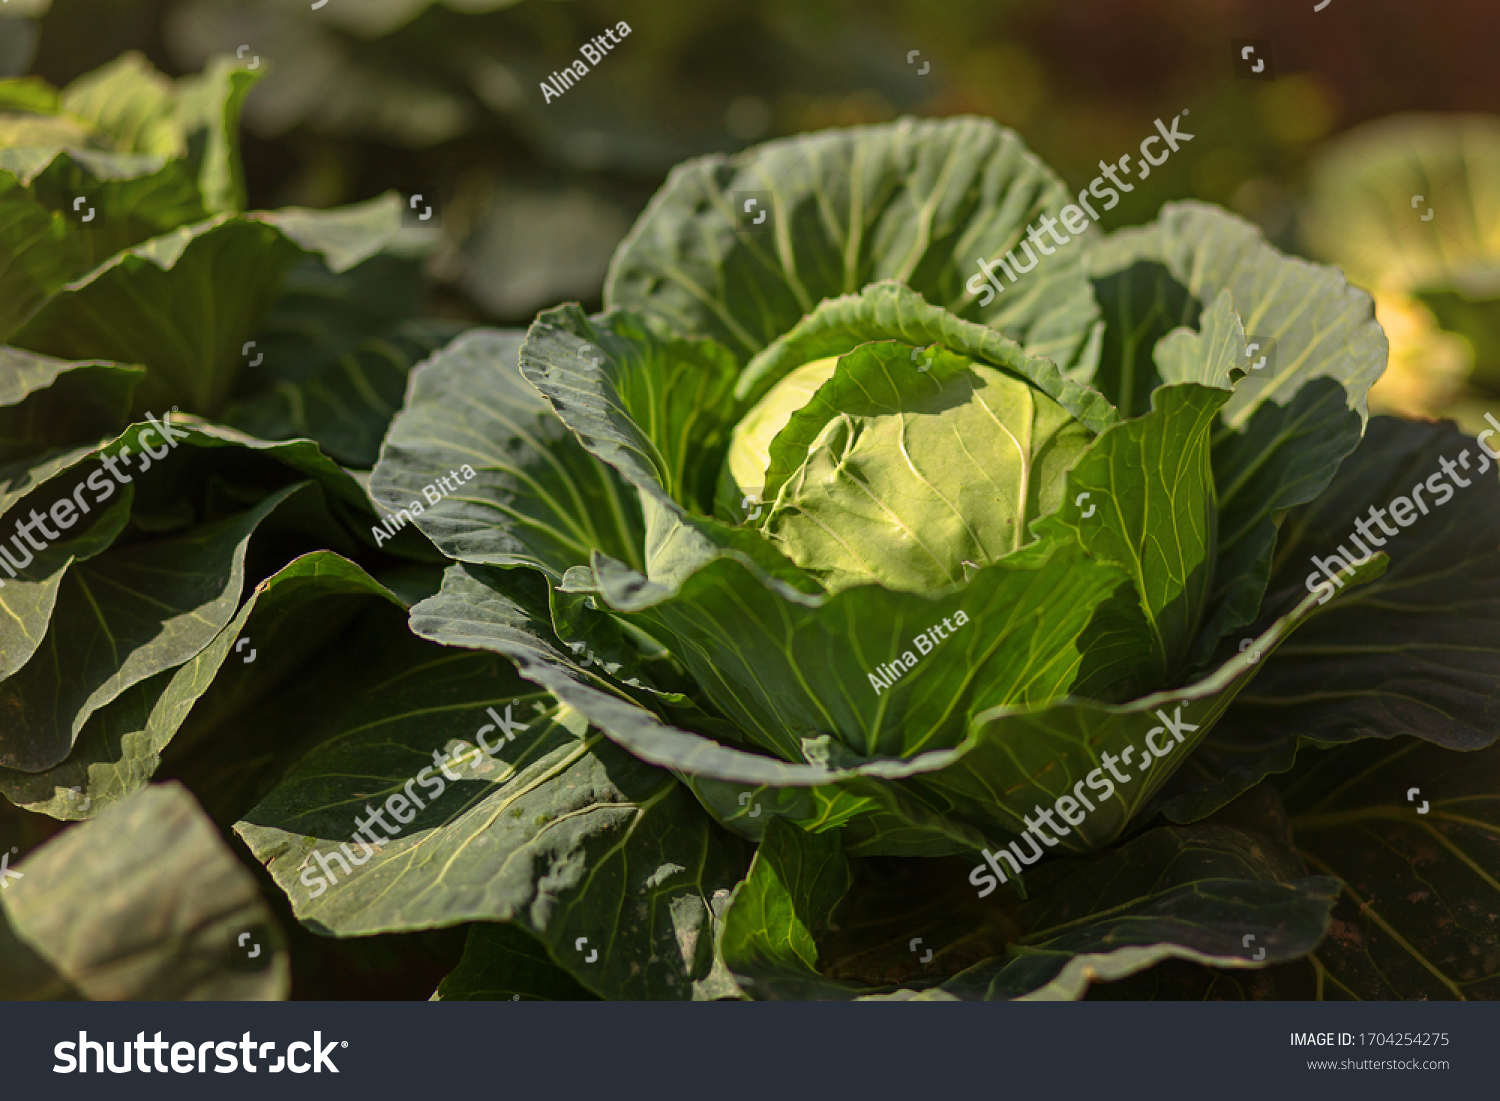 Fresh cabbage from farm field. View of green cabbages plants. Vegetarian food concept.Fresh green cabbage maturing heads growing in vegetable farm. #1704254275